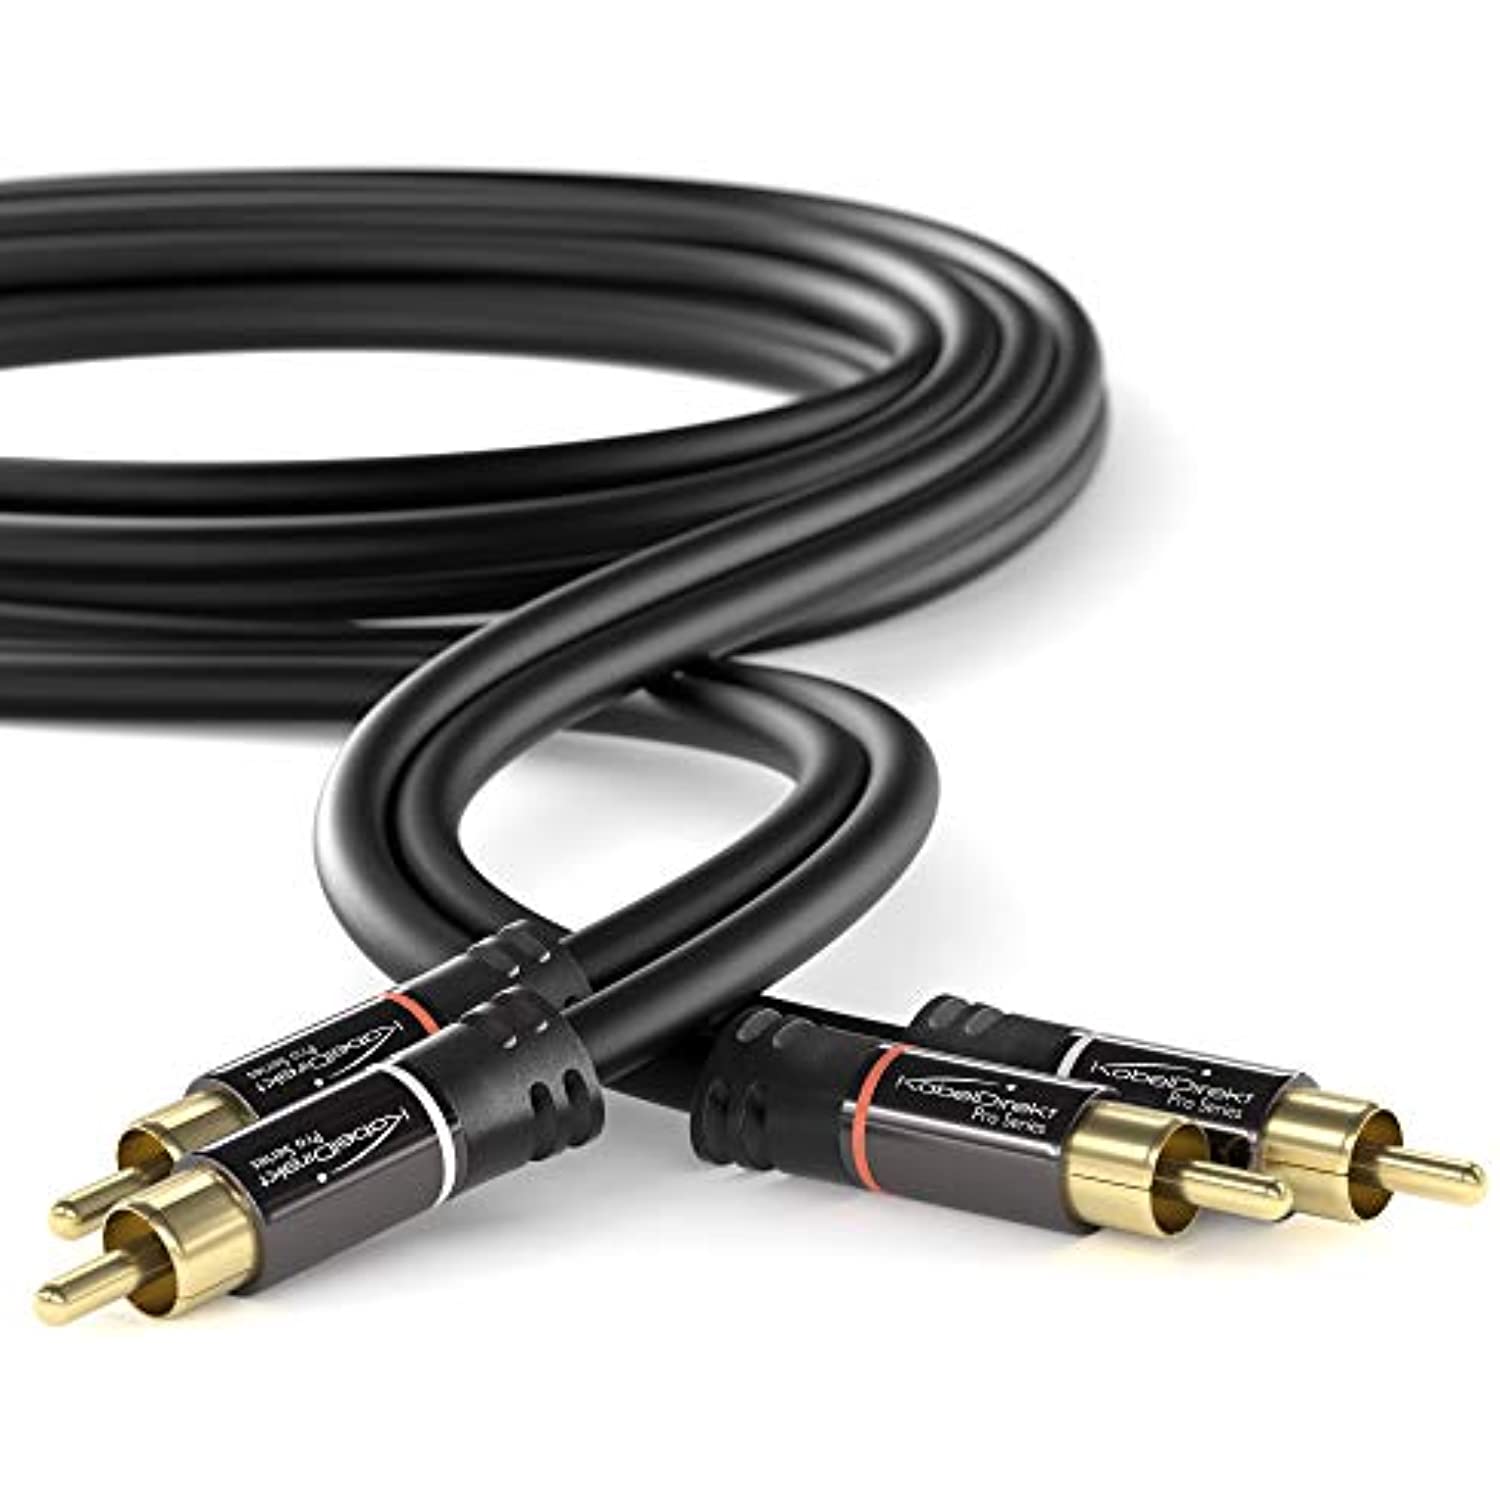 kabeldirekt rca stereo cable/cord (10 ft/feet short, dual 2 x rca male to 2 x rca male audio cable, digital & analogue, double-shielded, pro series) supports (amplifiers, av receivers, hi-fi) - image 2 of 6